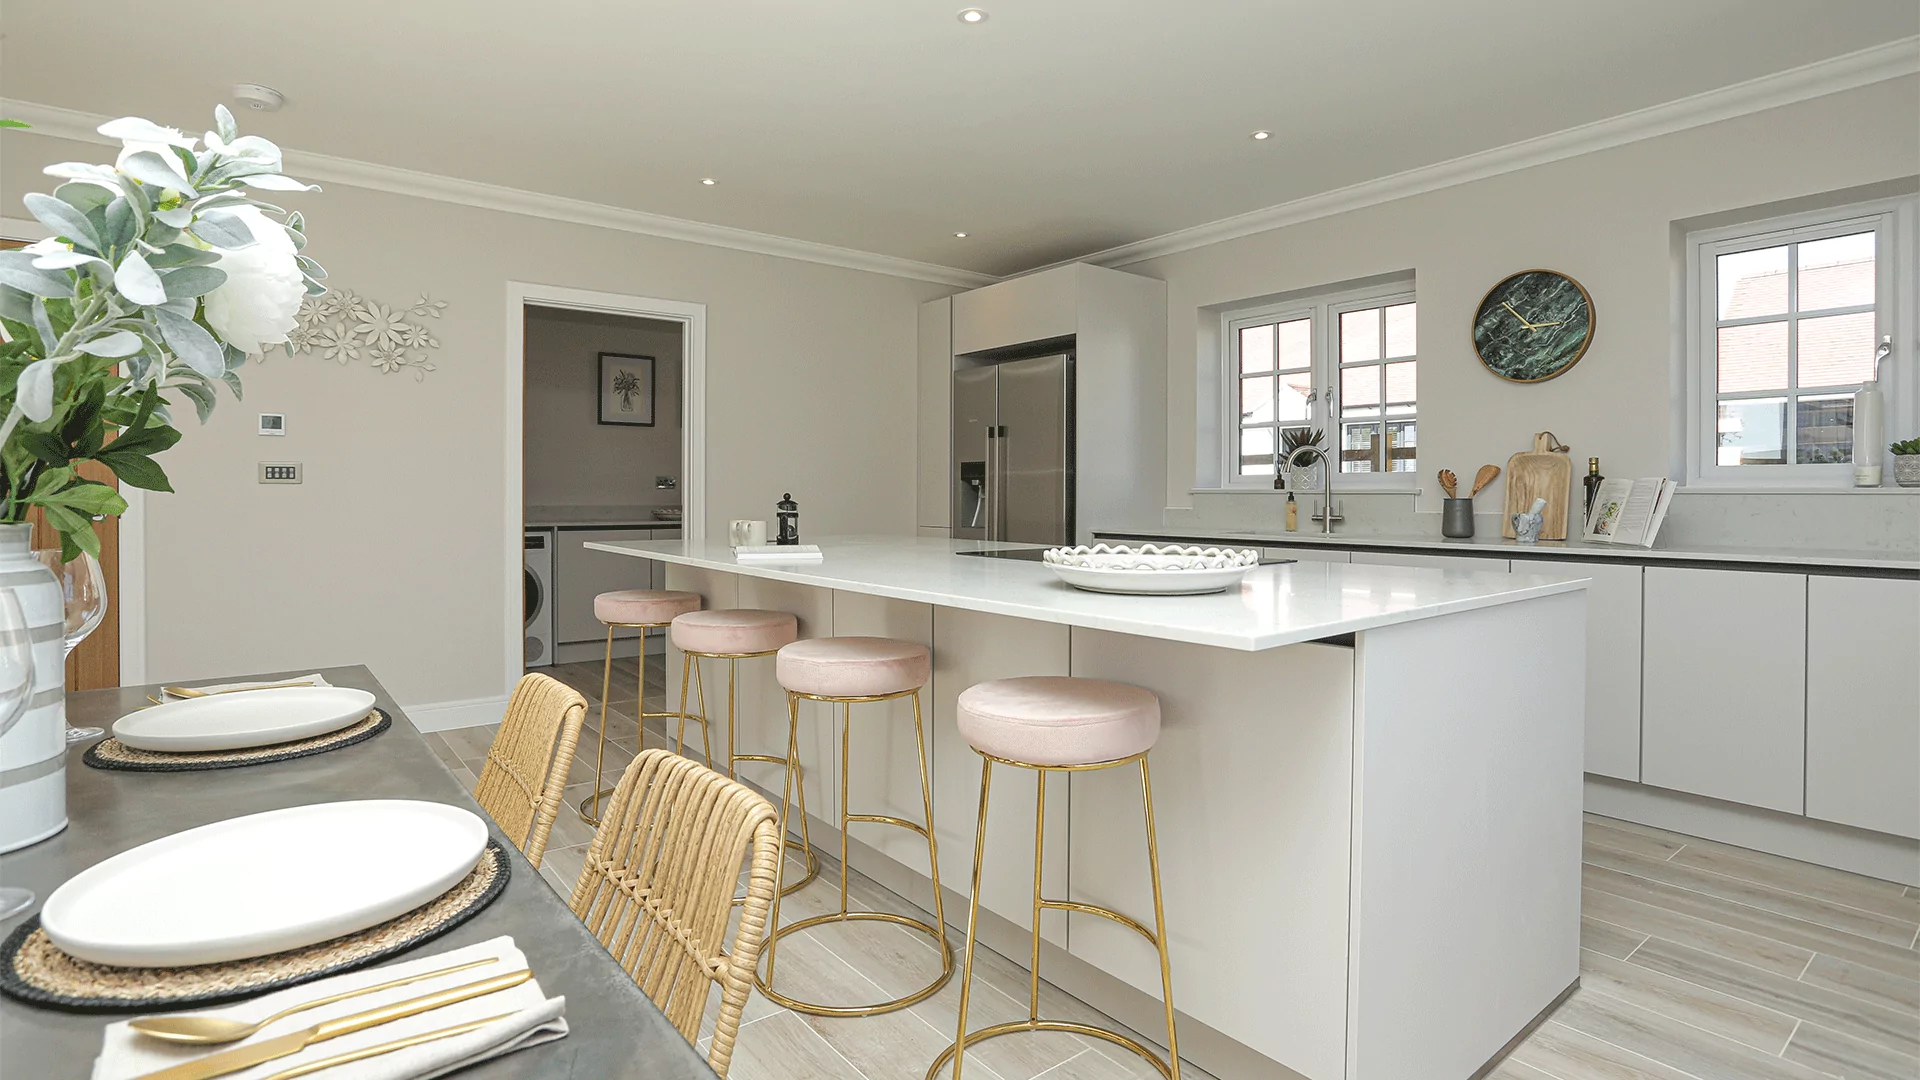 Miller's Meadow - Plot 8 Kitchen diner with a large central island and 4 bar stools